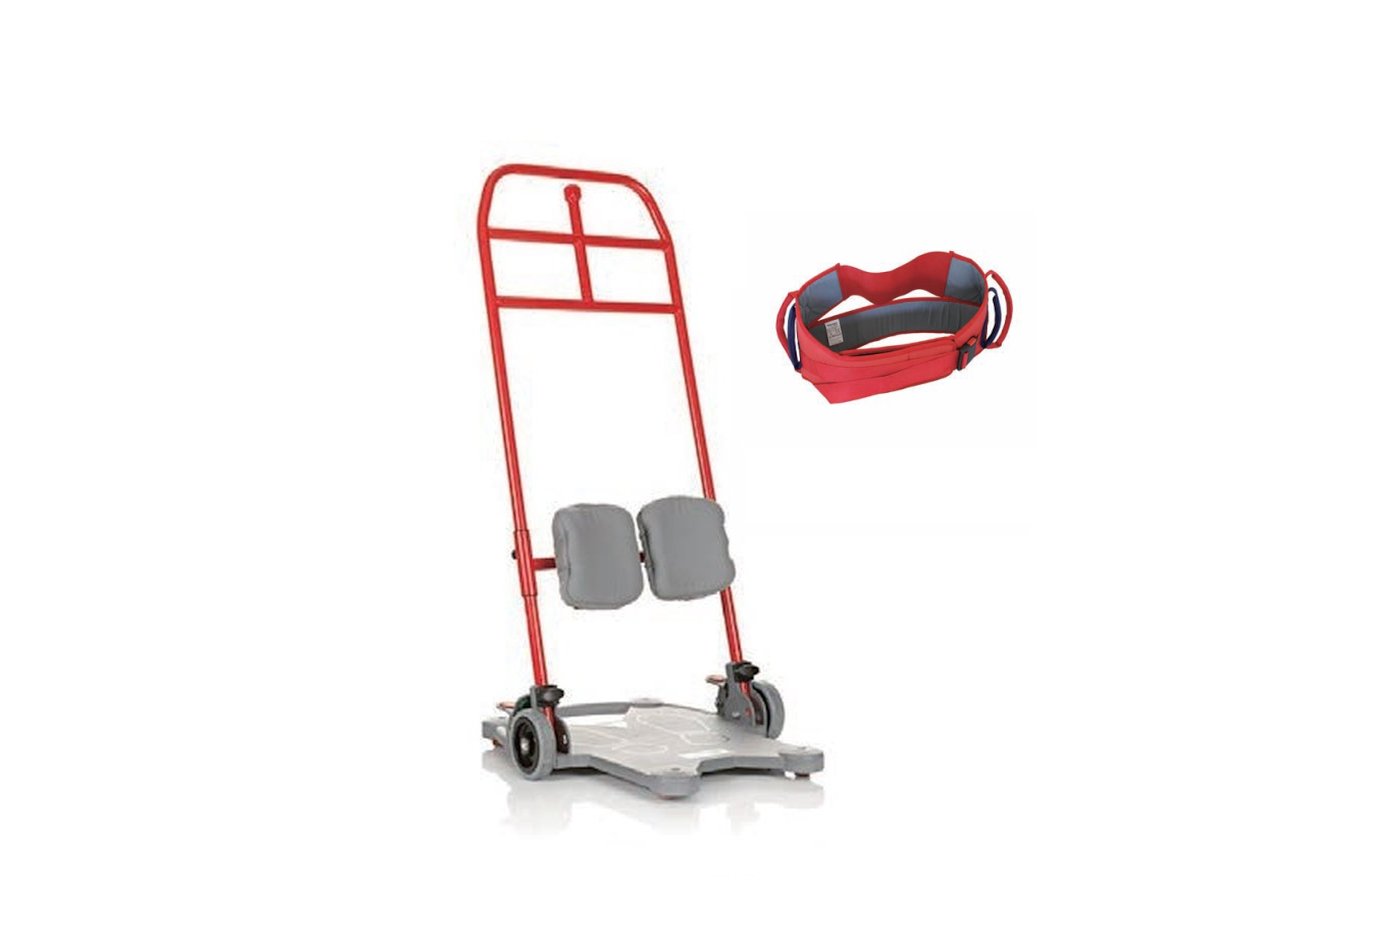 Return Transfer Aid with a base plate in grey, a rising ladder in red, and accessory of a pair of extra paddings for lower-leg support. The ReTurn belt in red is also shown separately beside it.